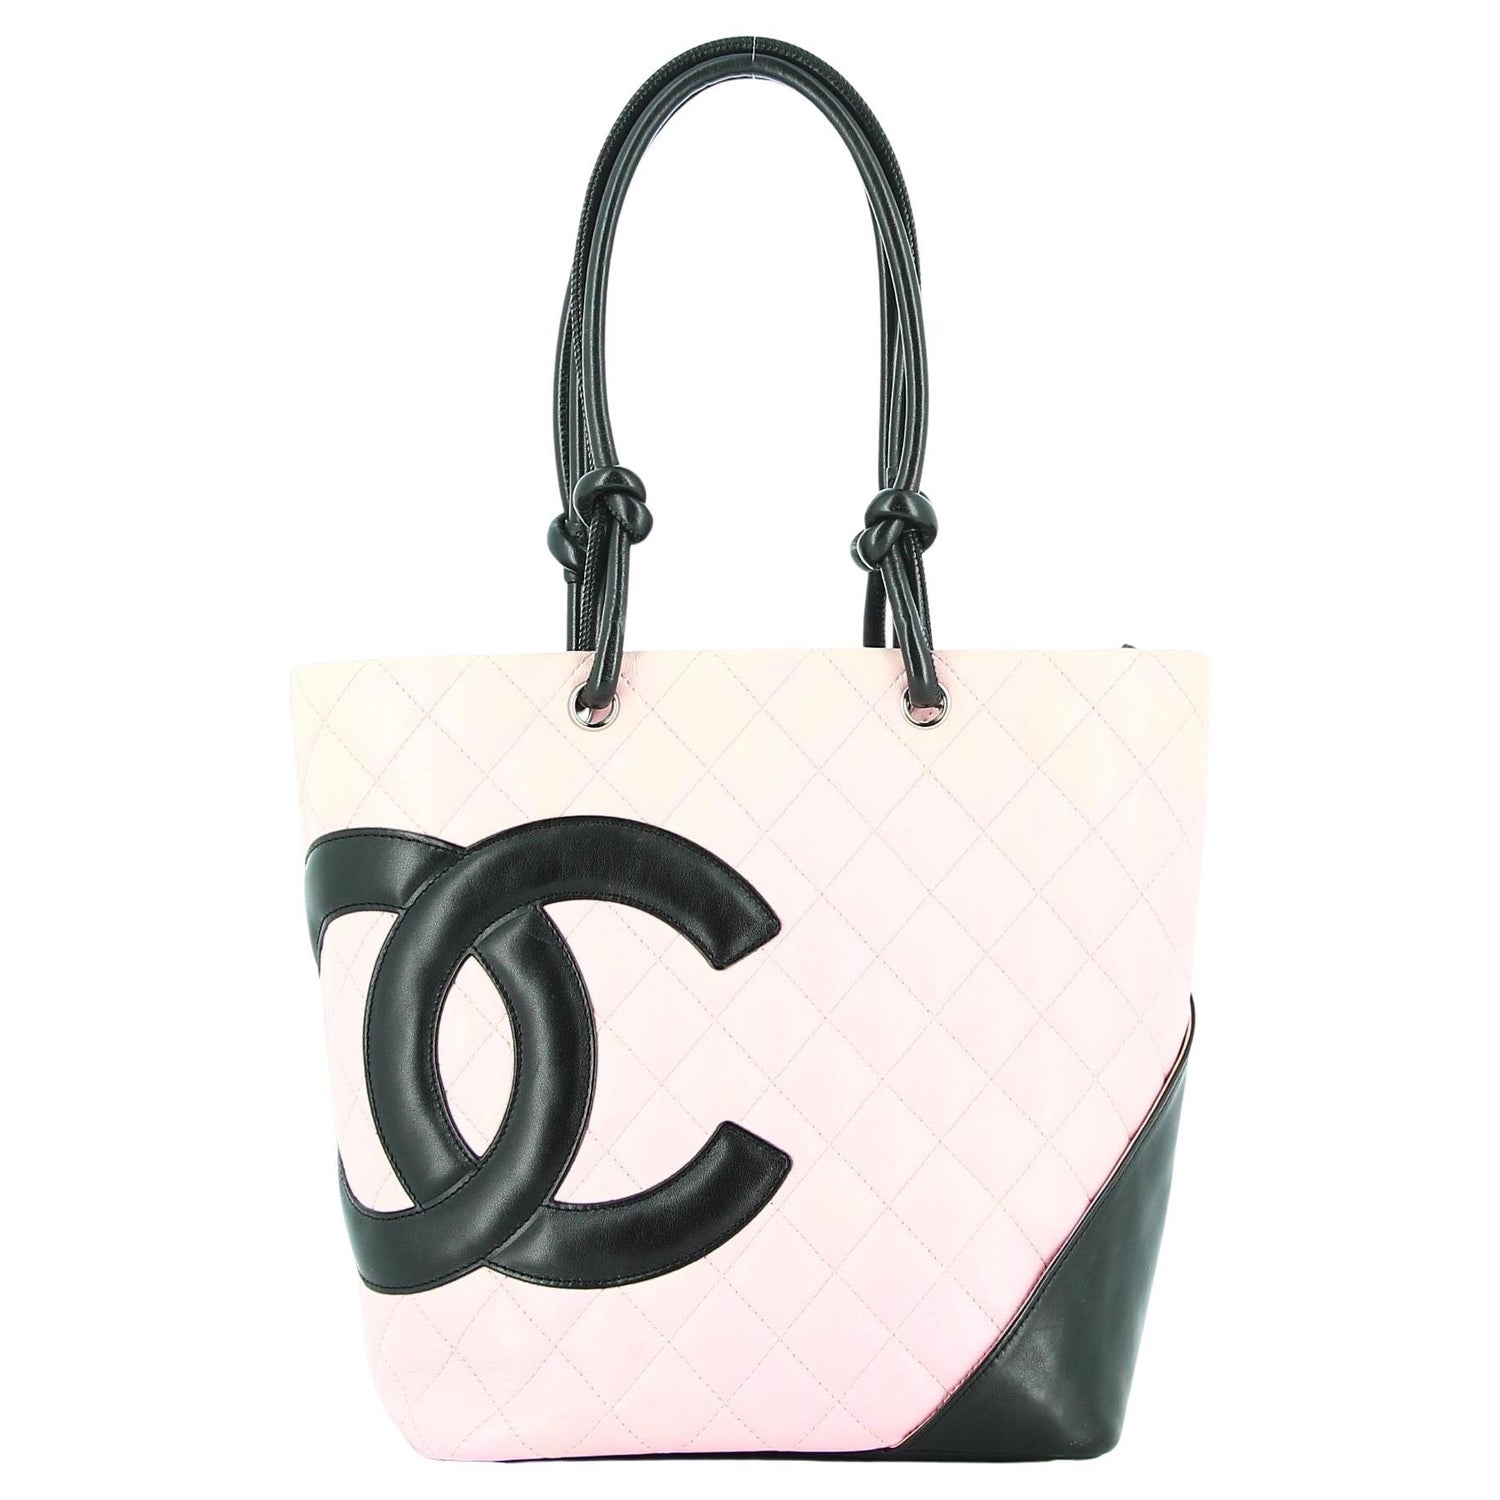 Chanel Pink Cambon Tote - For Sale on 1stDibs  chanel cambon bag, chanel  cambon pink, chanel cambon tote